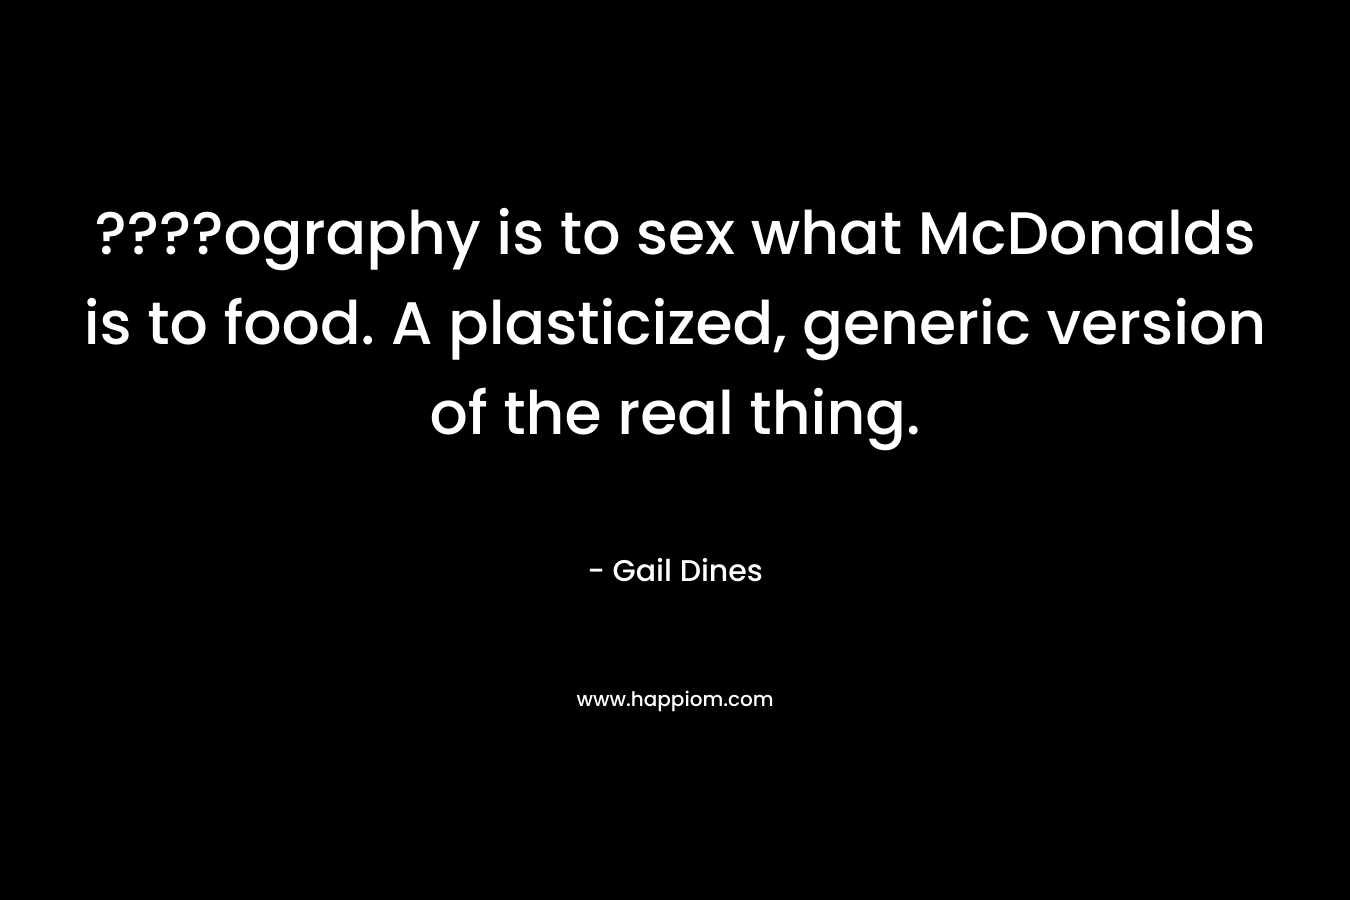 ????ography is to sex what McDonalds is to food. A plasticized, generic version of the real thing. – Gail Dines